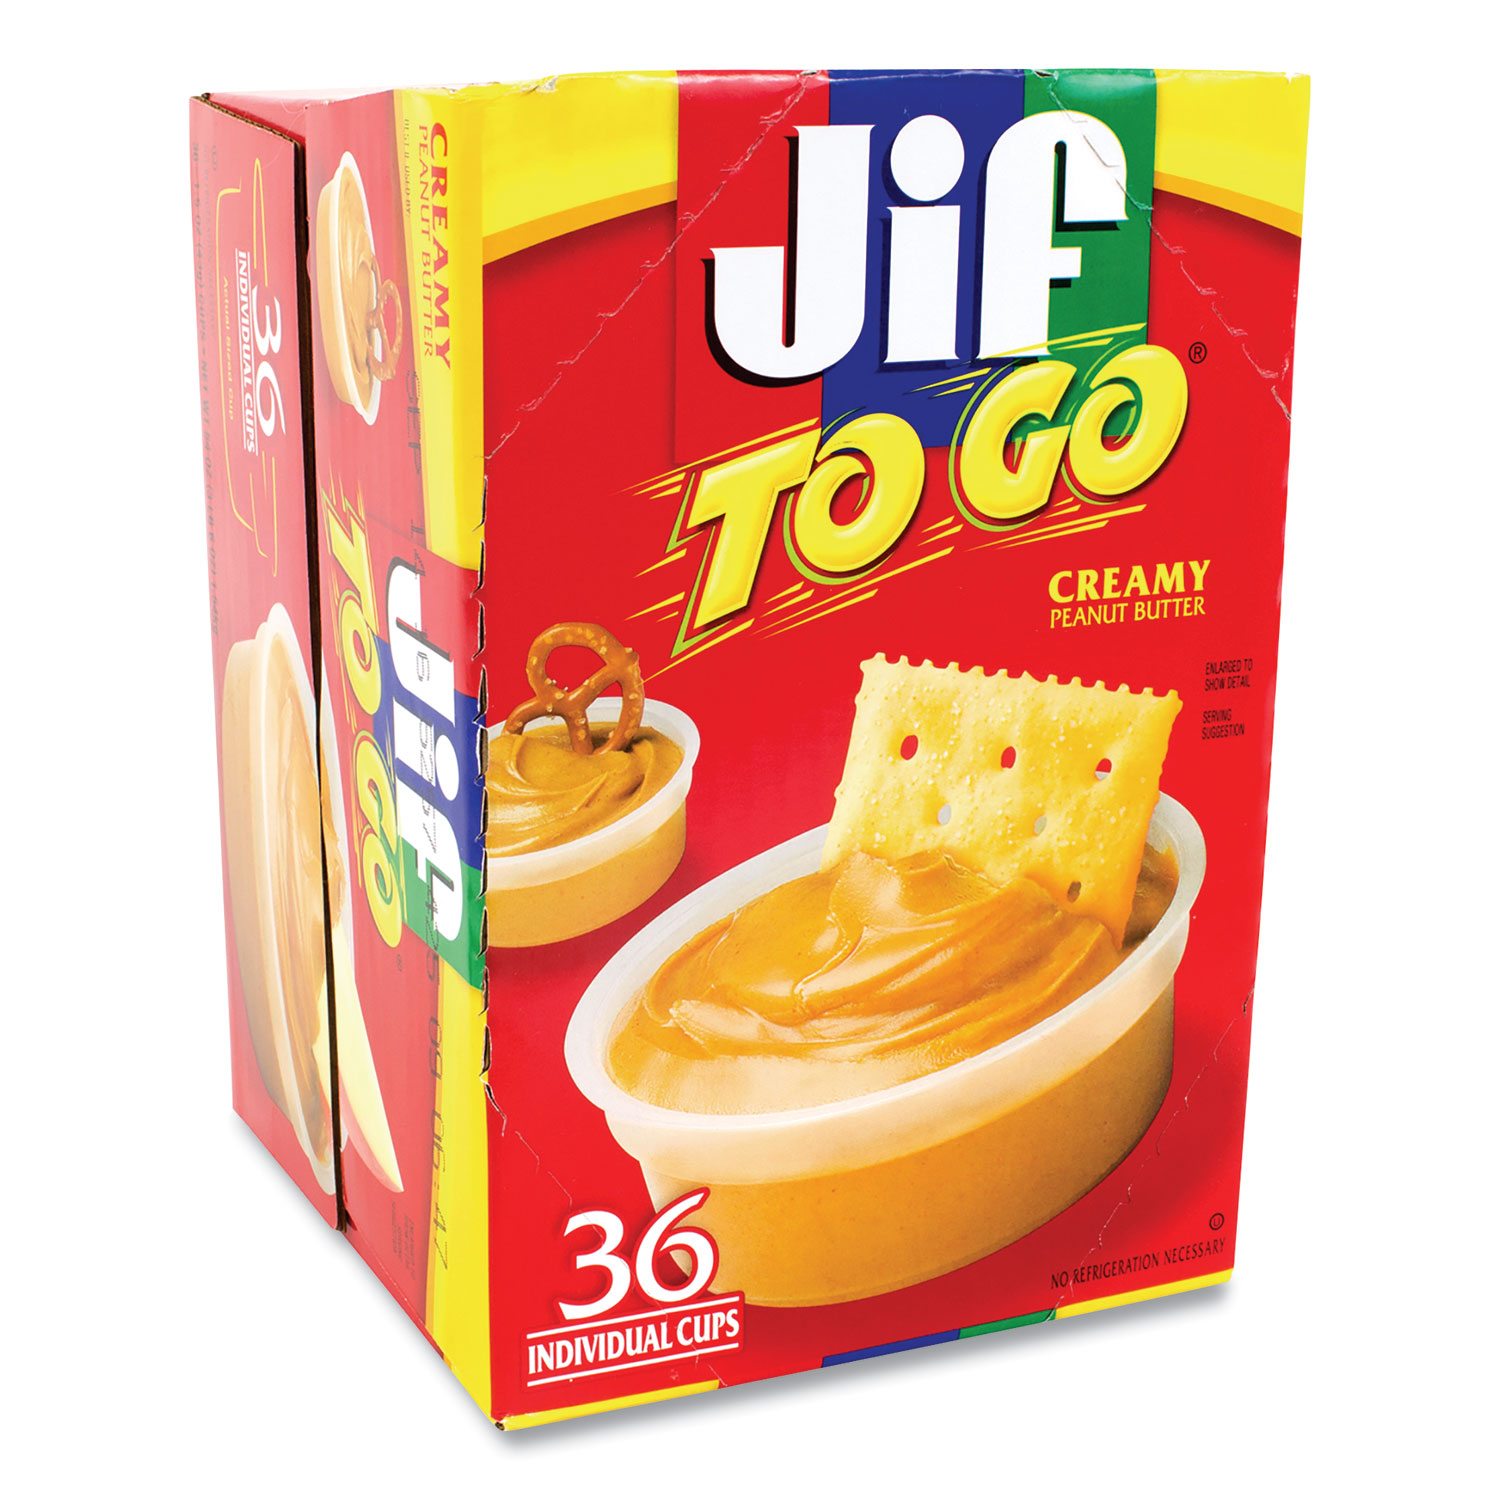  Jif To Go 24143 Spreads, Creamy Peanut Butter, 1.5 oz Cup, 36 Cups/Box, Free Delivery in 1-4 Business Days (GRR22000535) 